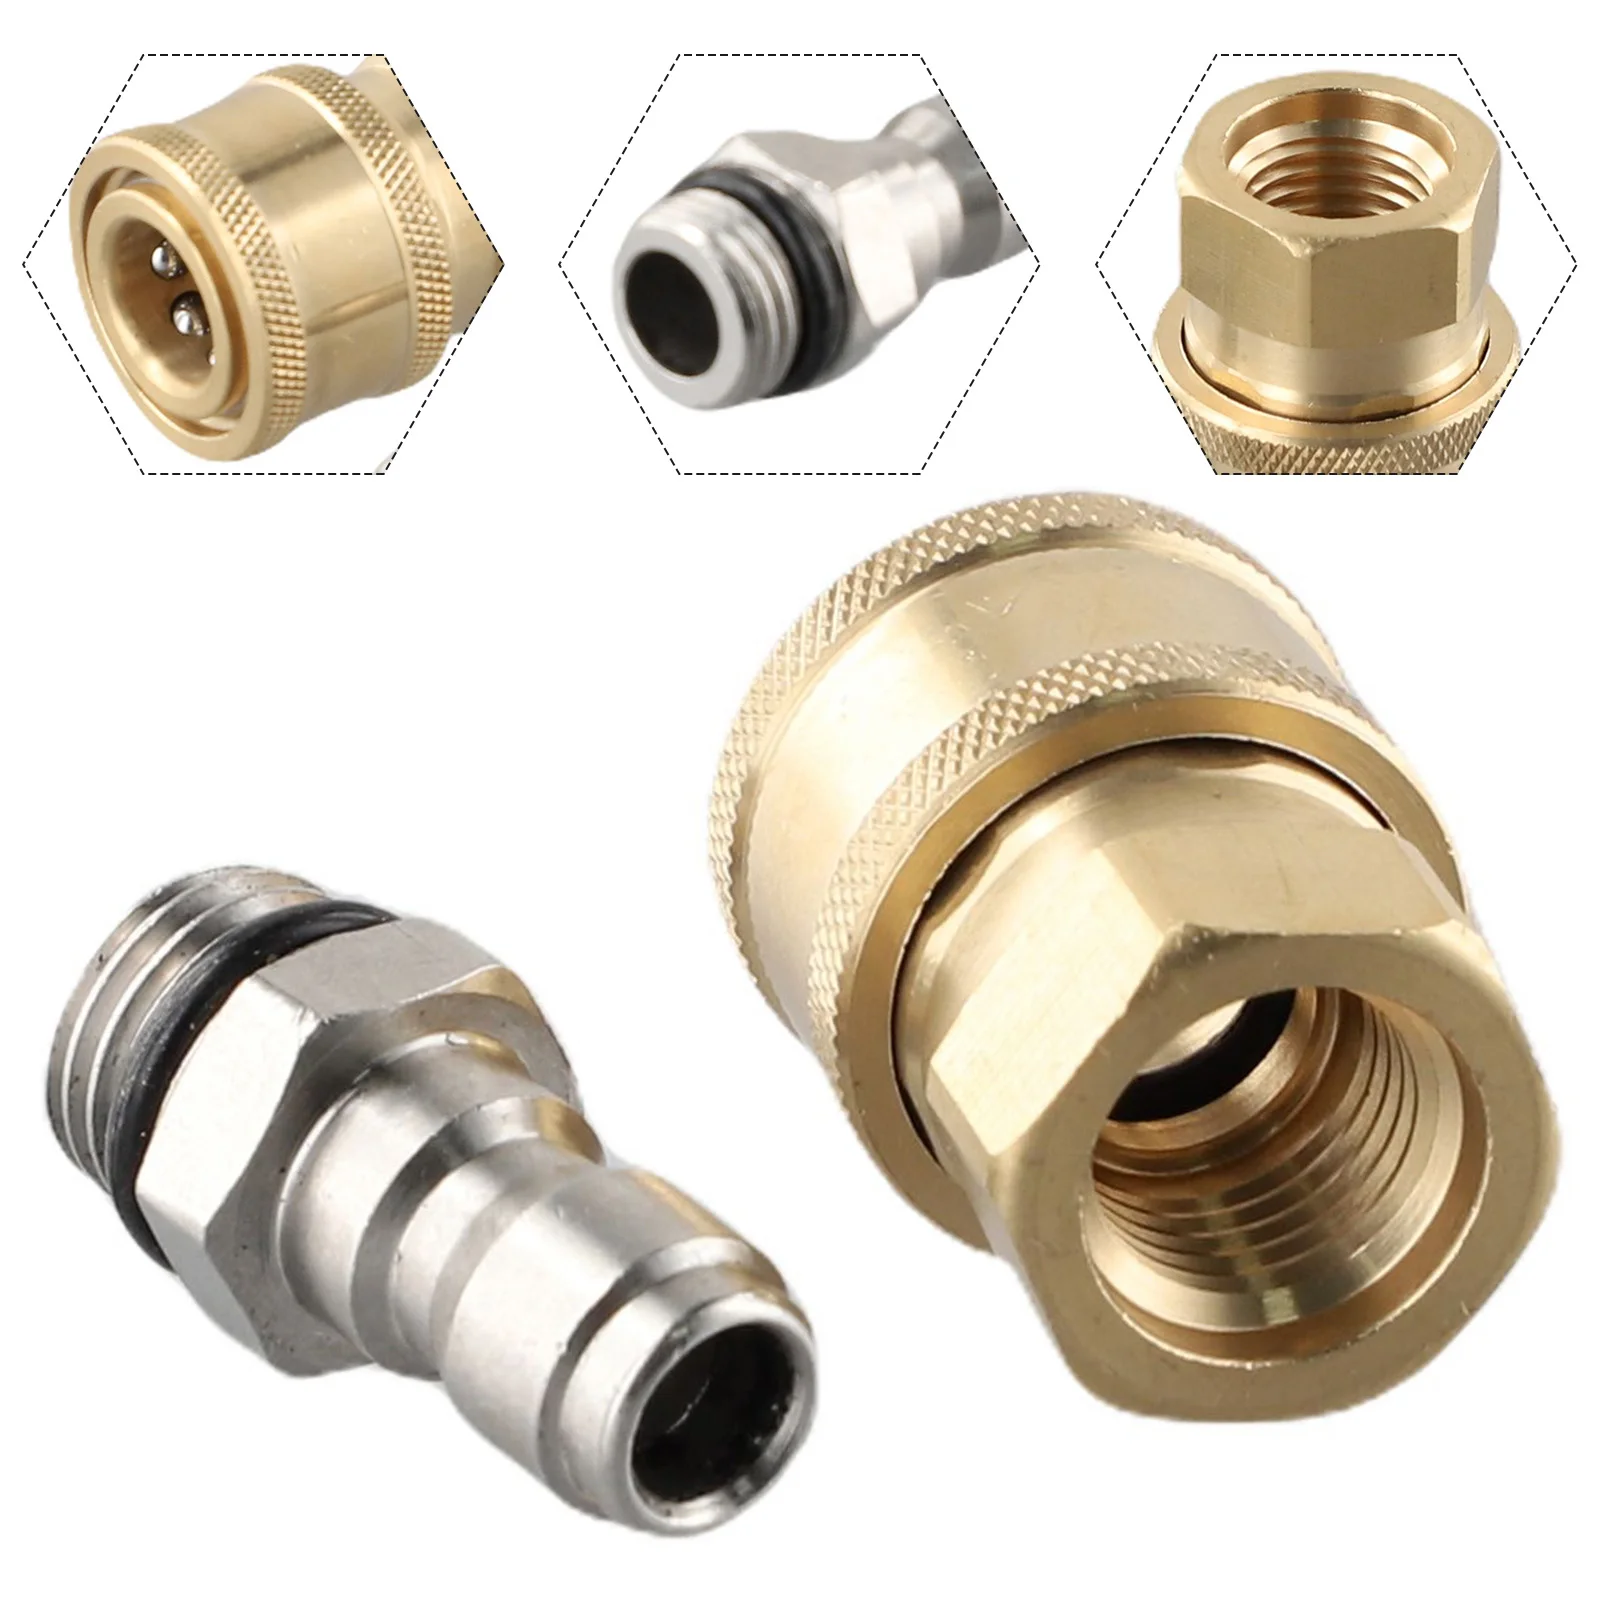 

Spare Connector Parts Garden Washing Adapter Stainless Steel Pressure Washer Quick Release 1/4 Male M22/14 Female